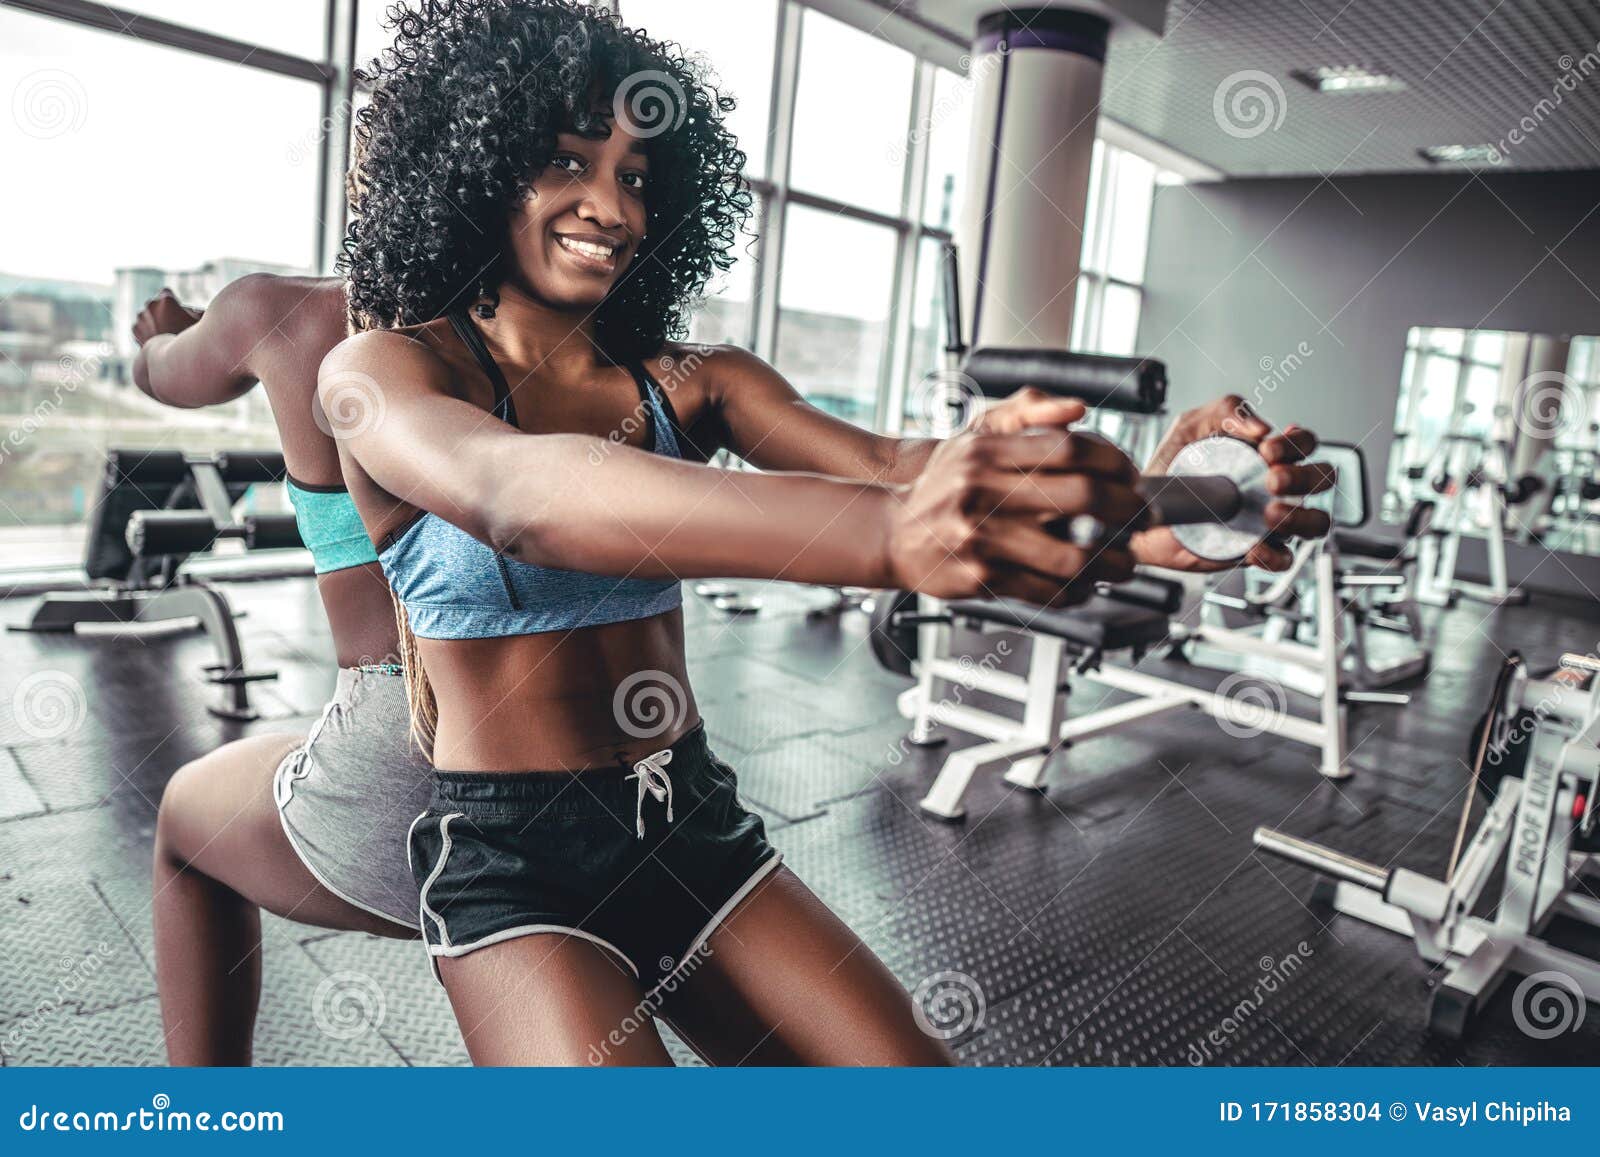 https://thumbs.dreamstime.com/z/fitness-sport-training-lifestyle-concept-group-happy-women-dumbbells-flexing-muscles-gym-fitness-sport-training-171858304.jpg